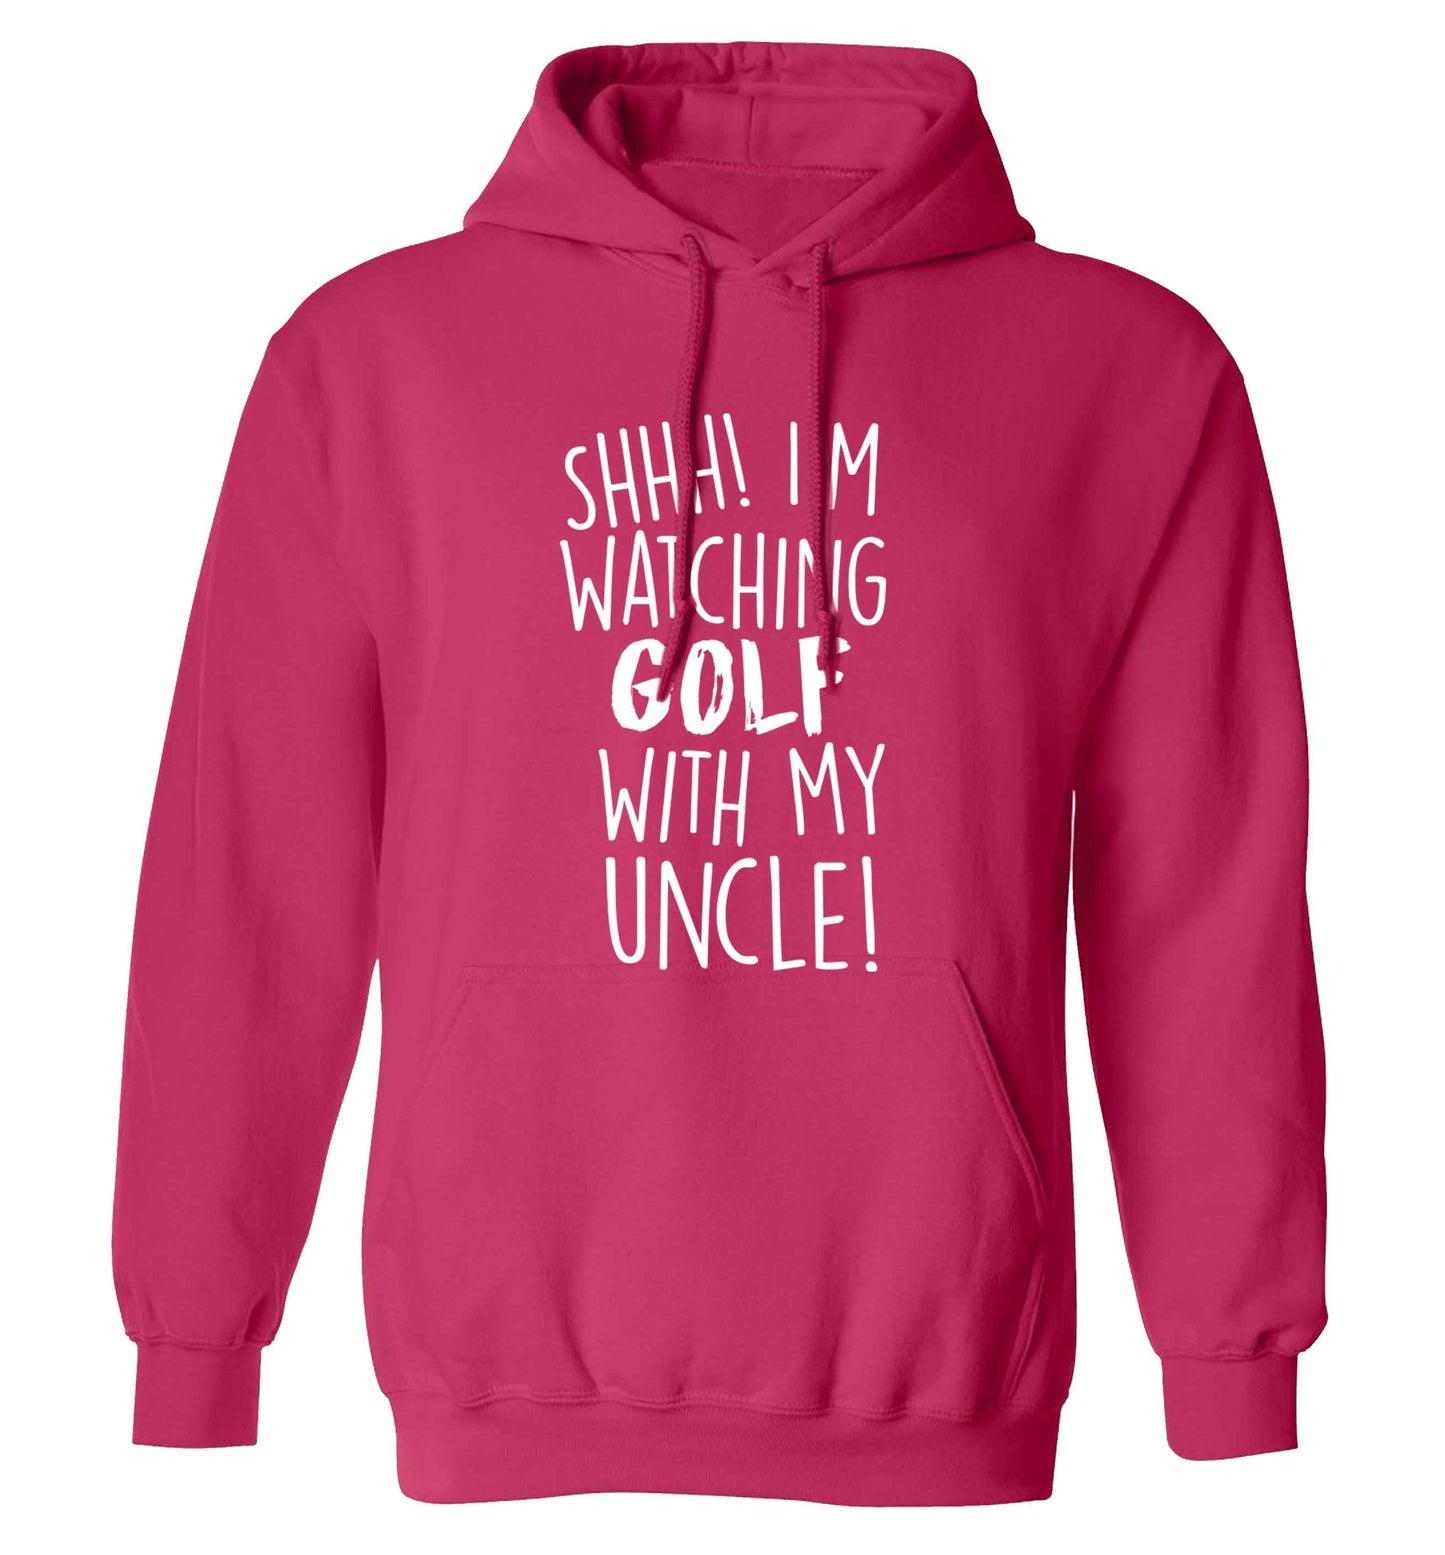 Shh I'm watching golf with my uncle adults unisex pink hoodie 2XL